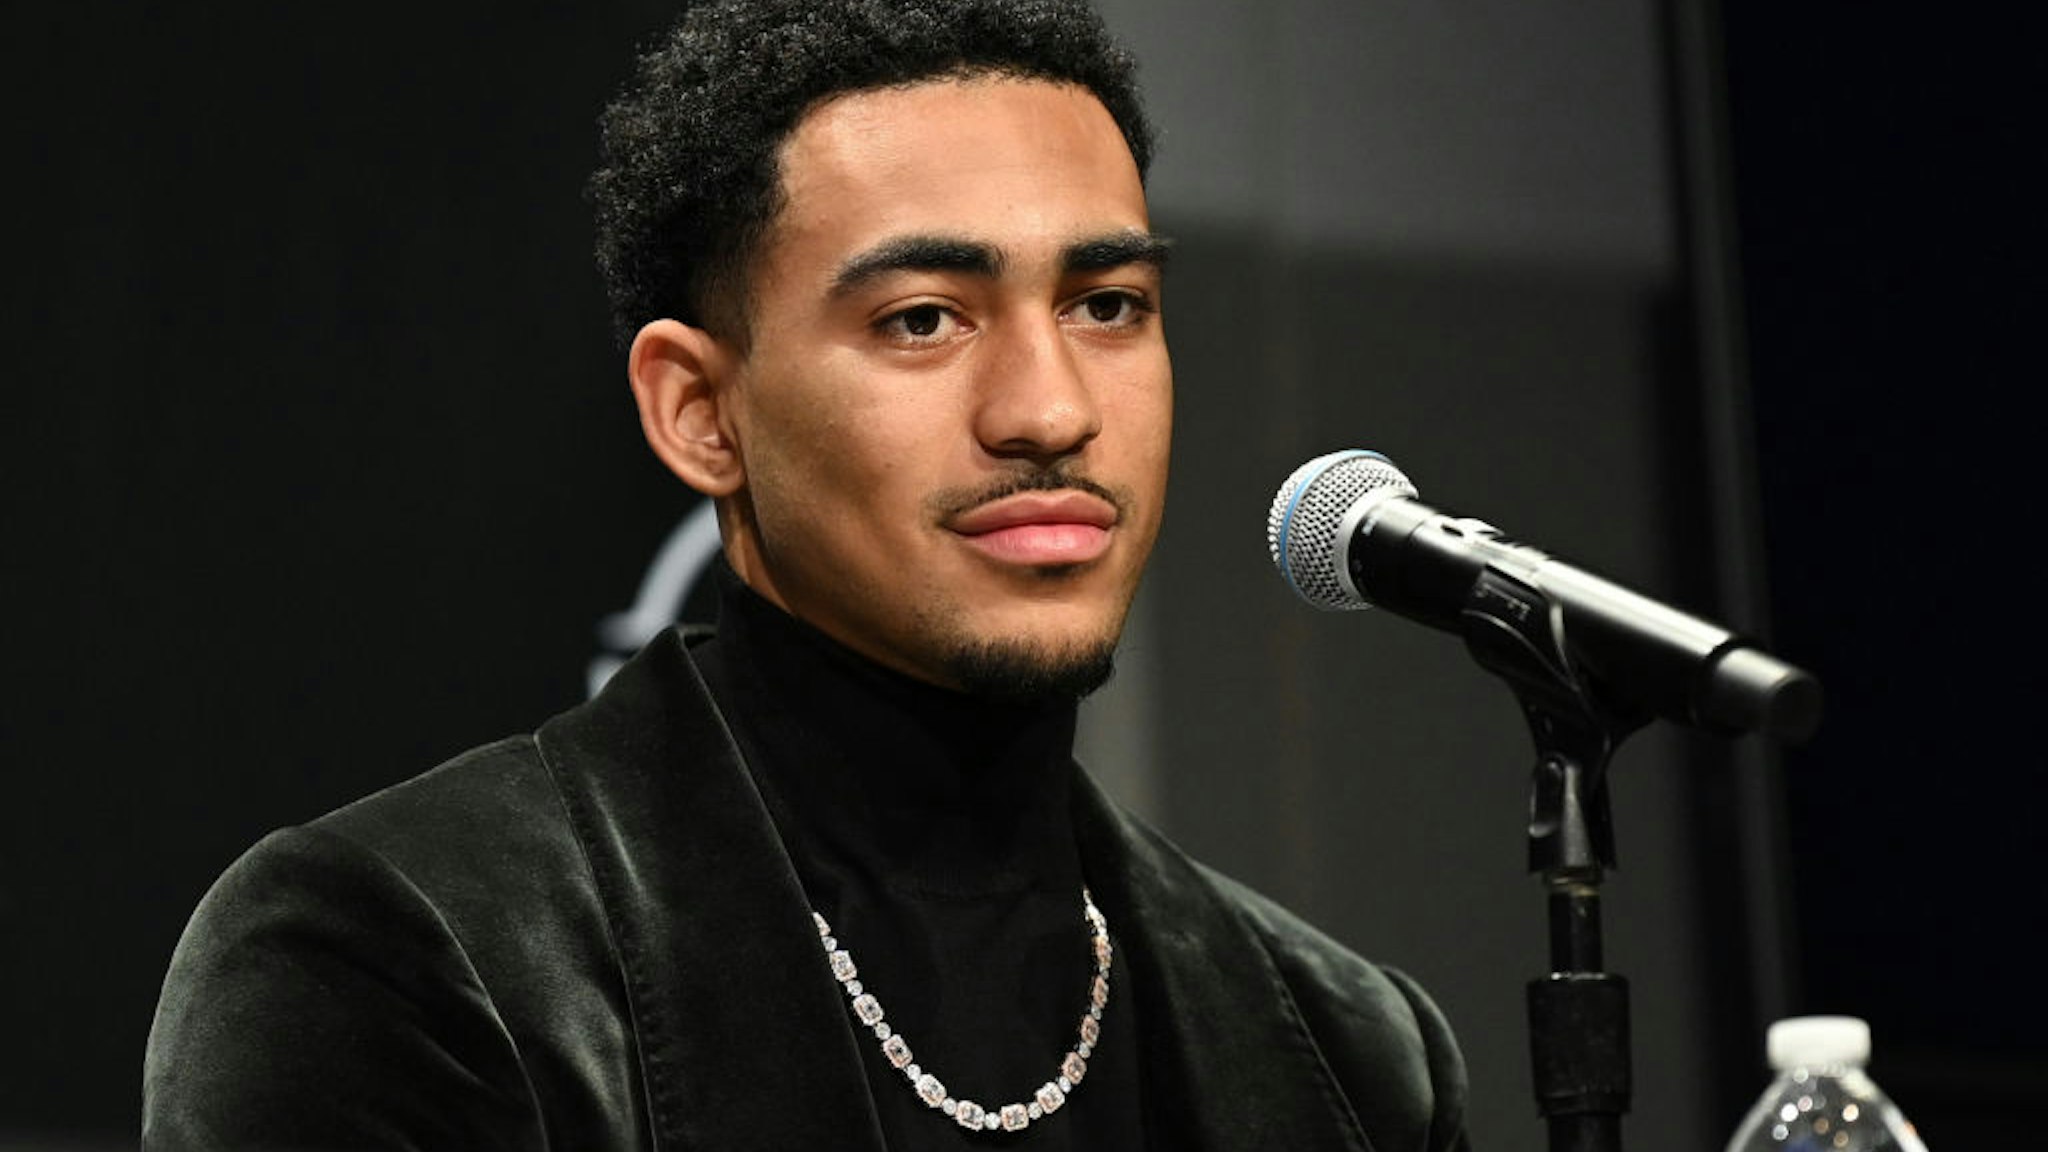 NEW YORK, NEW YORK - DECEMBER 11: The Heisman Trophy finalist quarterback Bryce Young from Alabama speaks at the 2021 Heisman Trophy finalist press conference at the Marriott Marquis Hotel on December 11, 2021 in New York City. (Photo by Bryan Bedder/Getty Images)